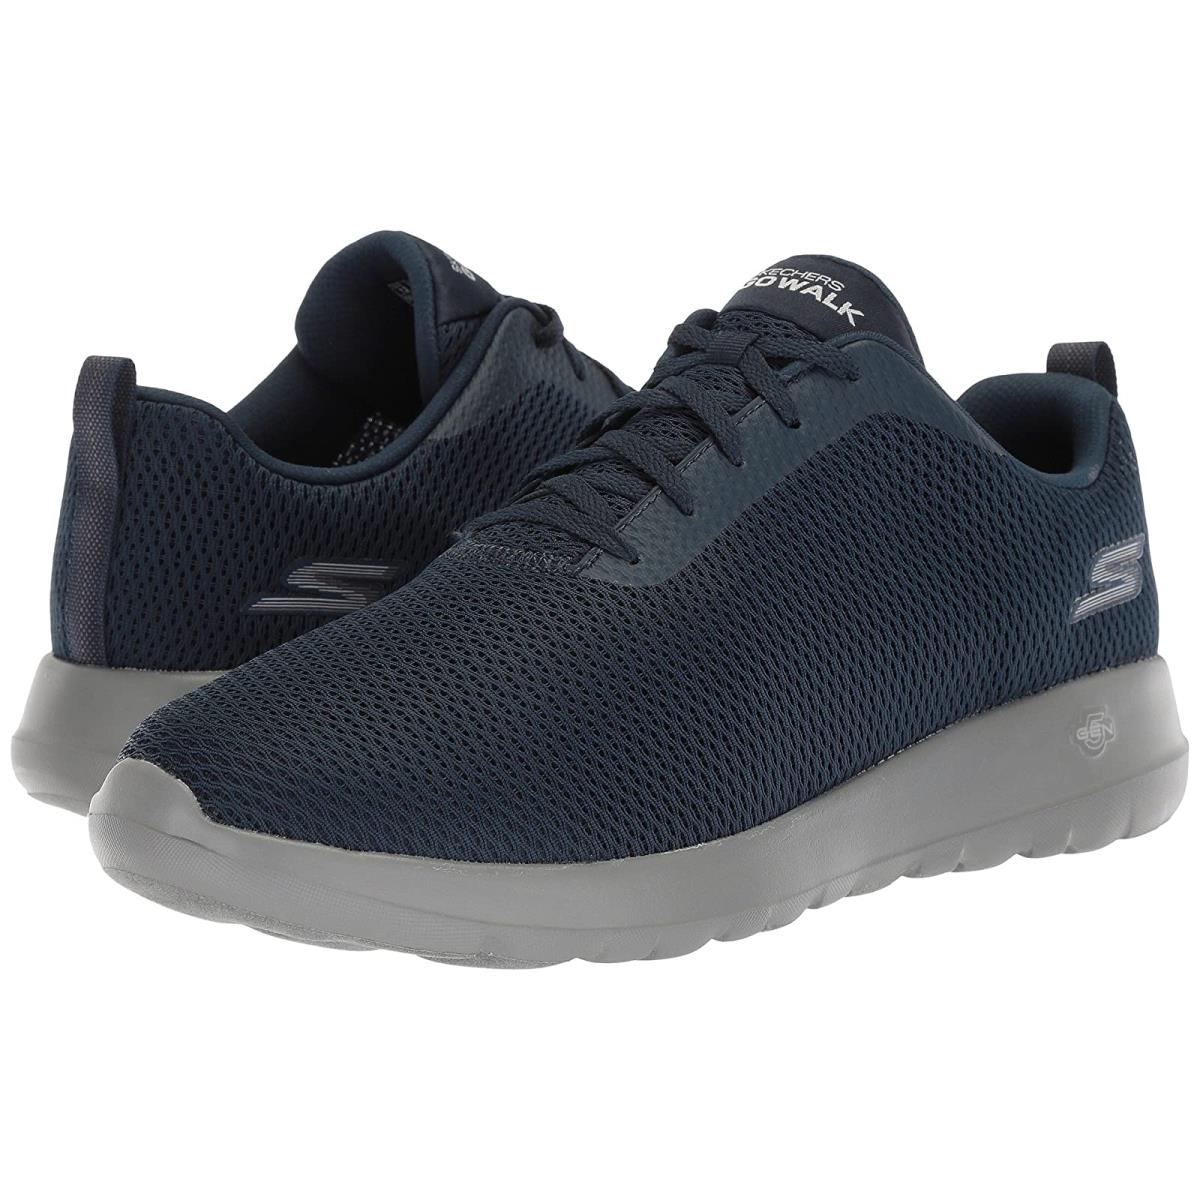 Man`s Sneakers Athletic Shoes Skechers Performance Go Walk Max - 54601 Navy/Gray